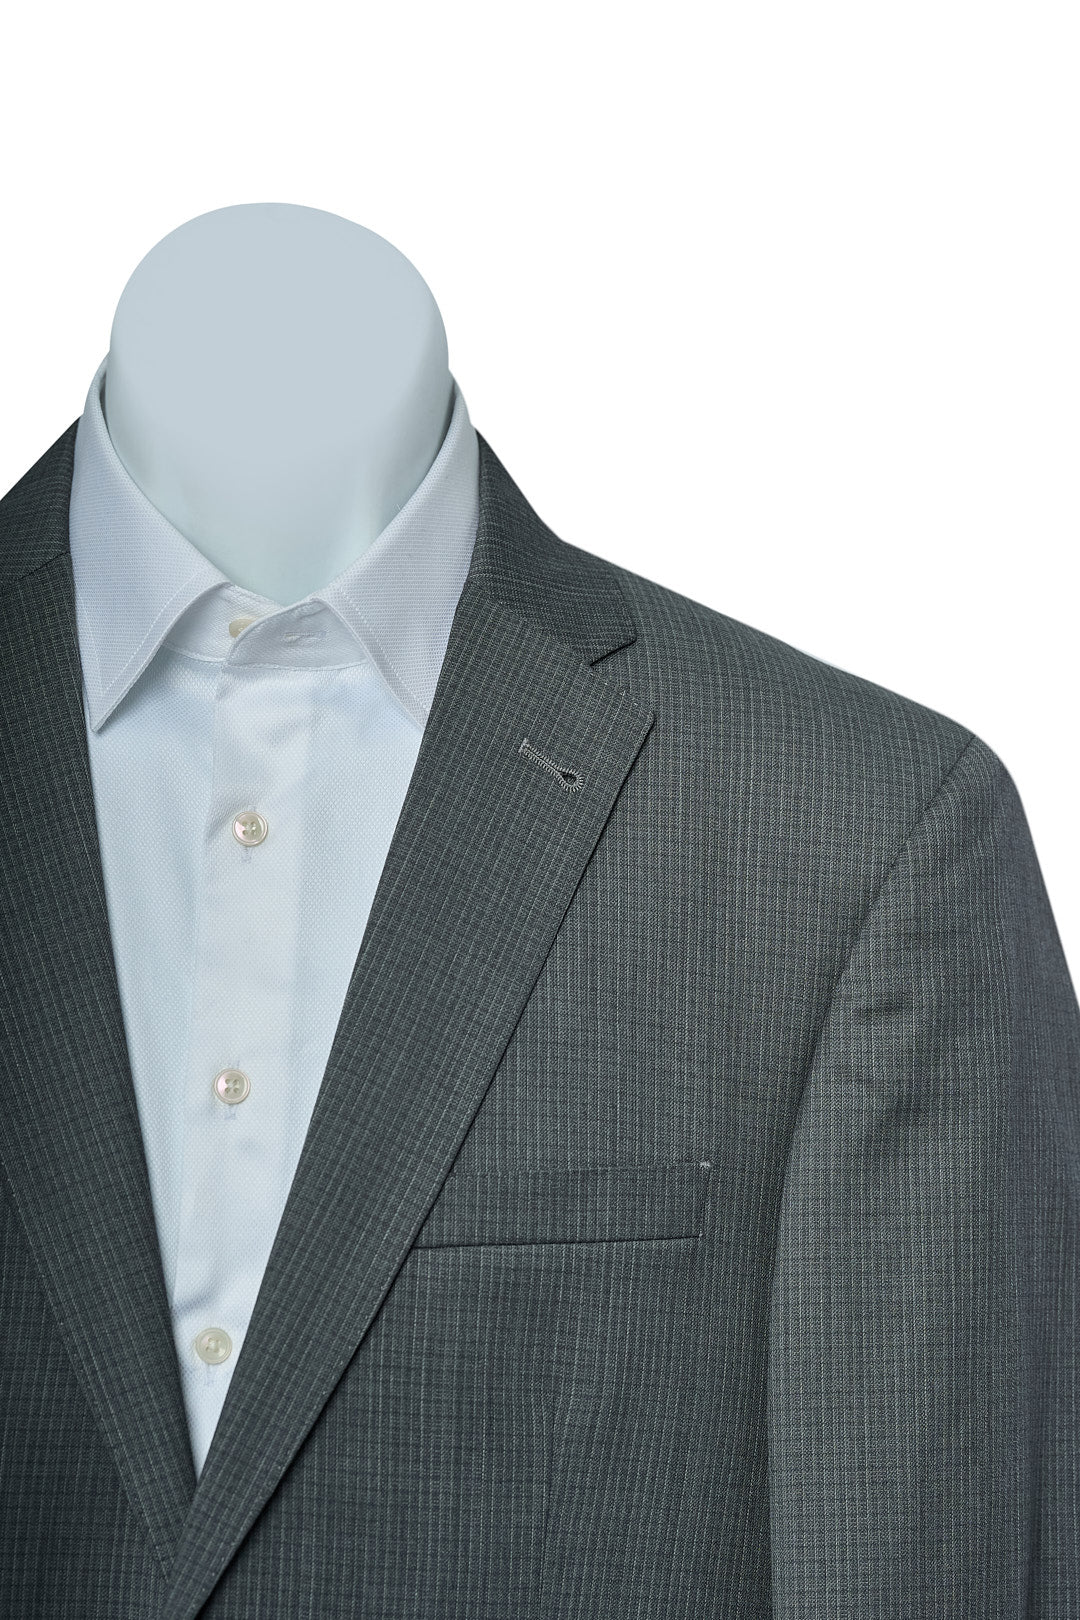 Small Check Gray Suit